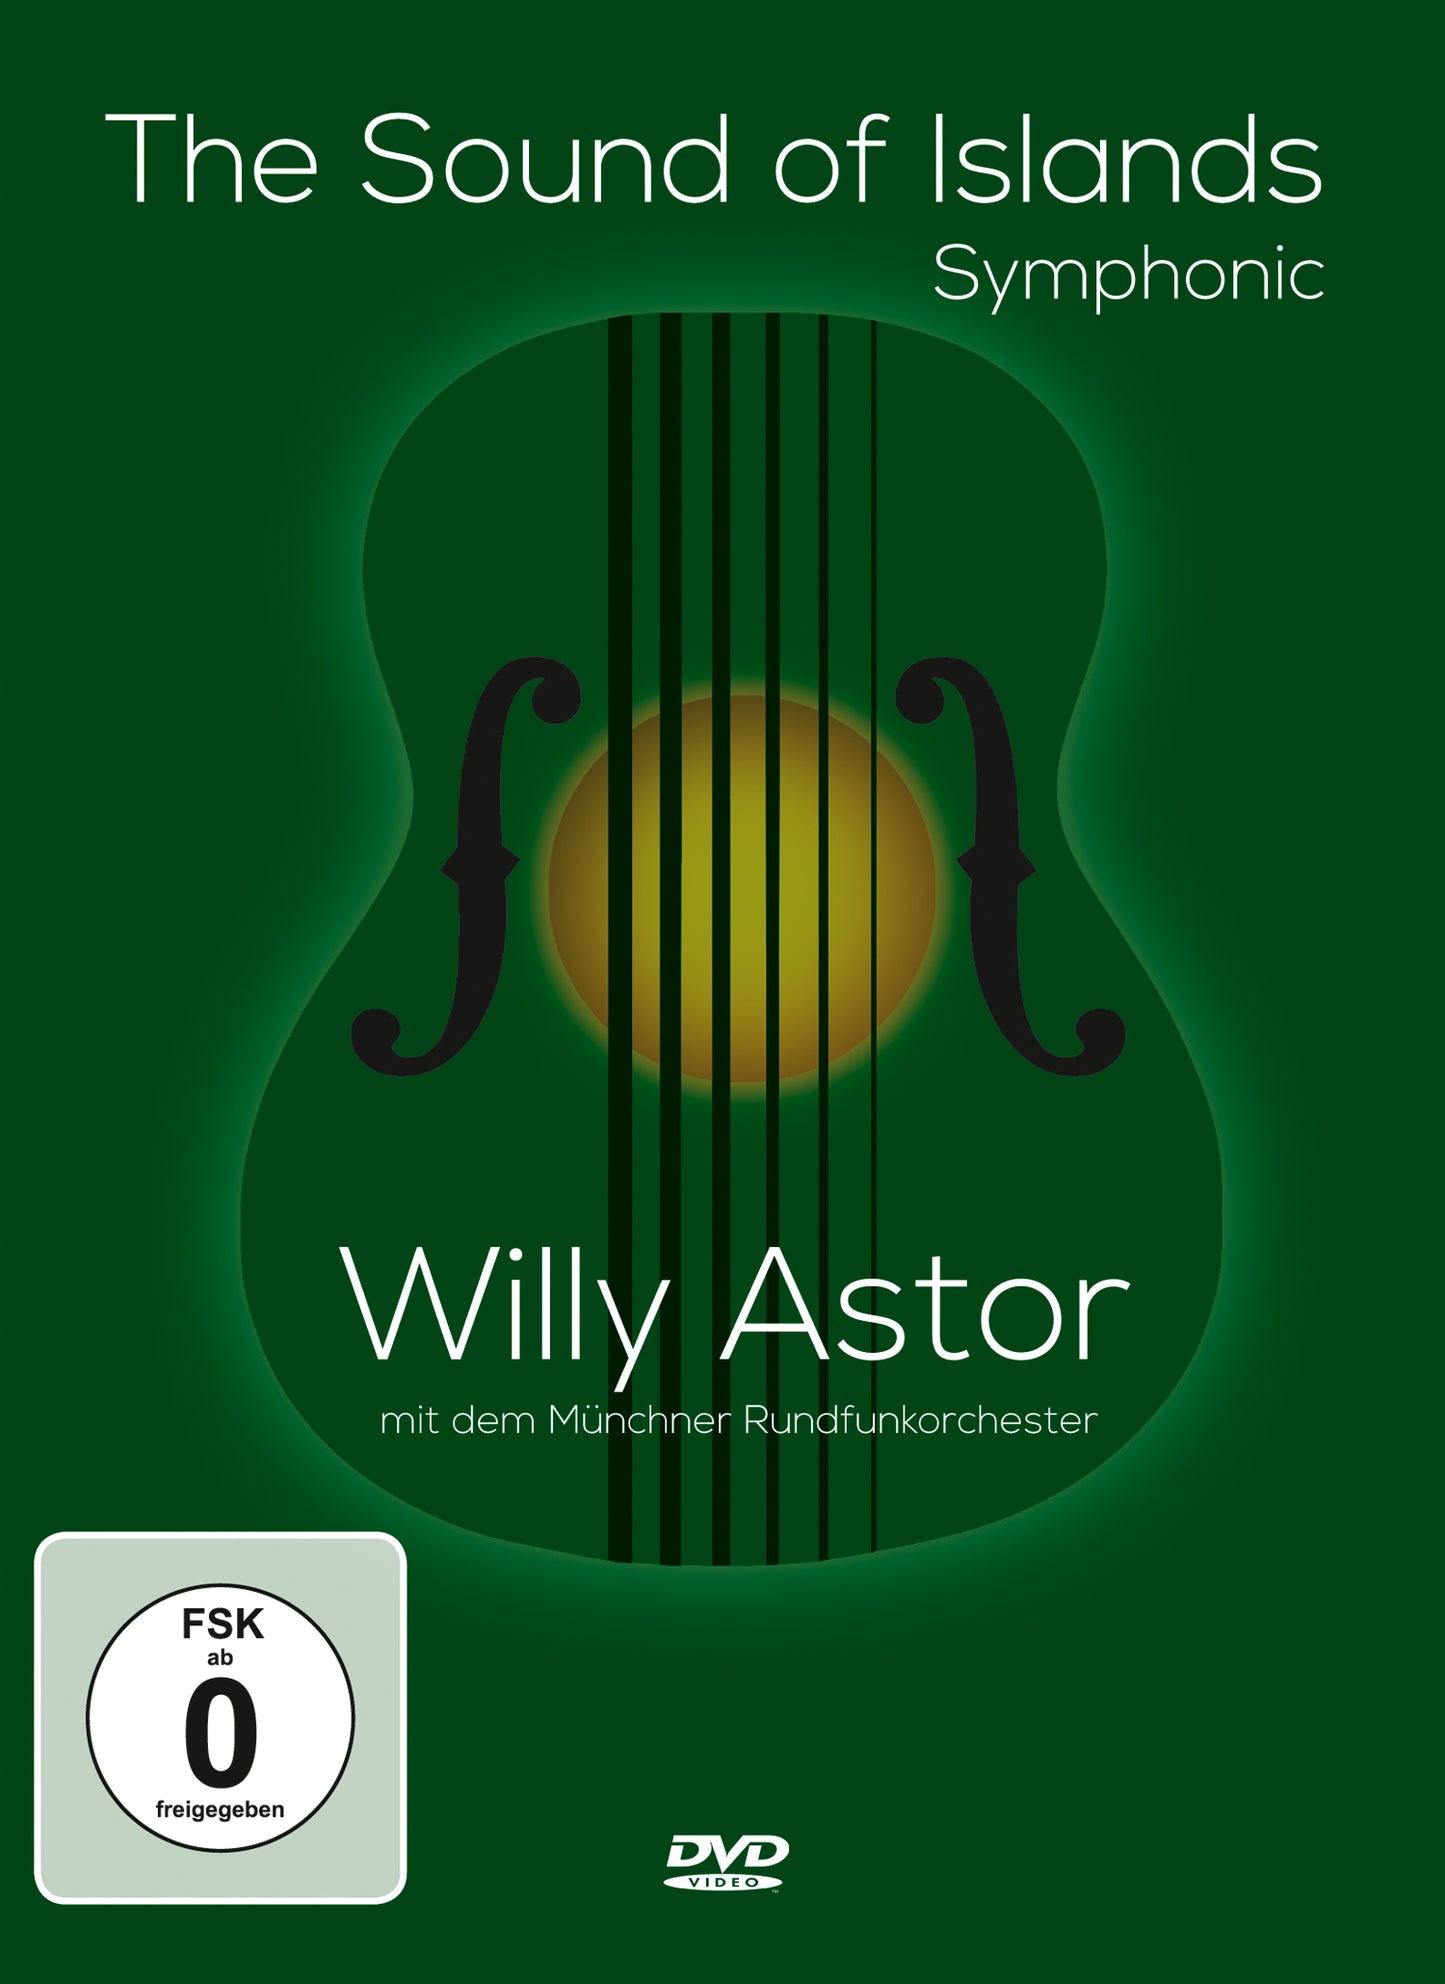 WILLY ASTOR - Sound Of Symphonic DVD